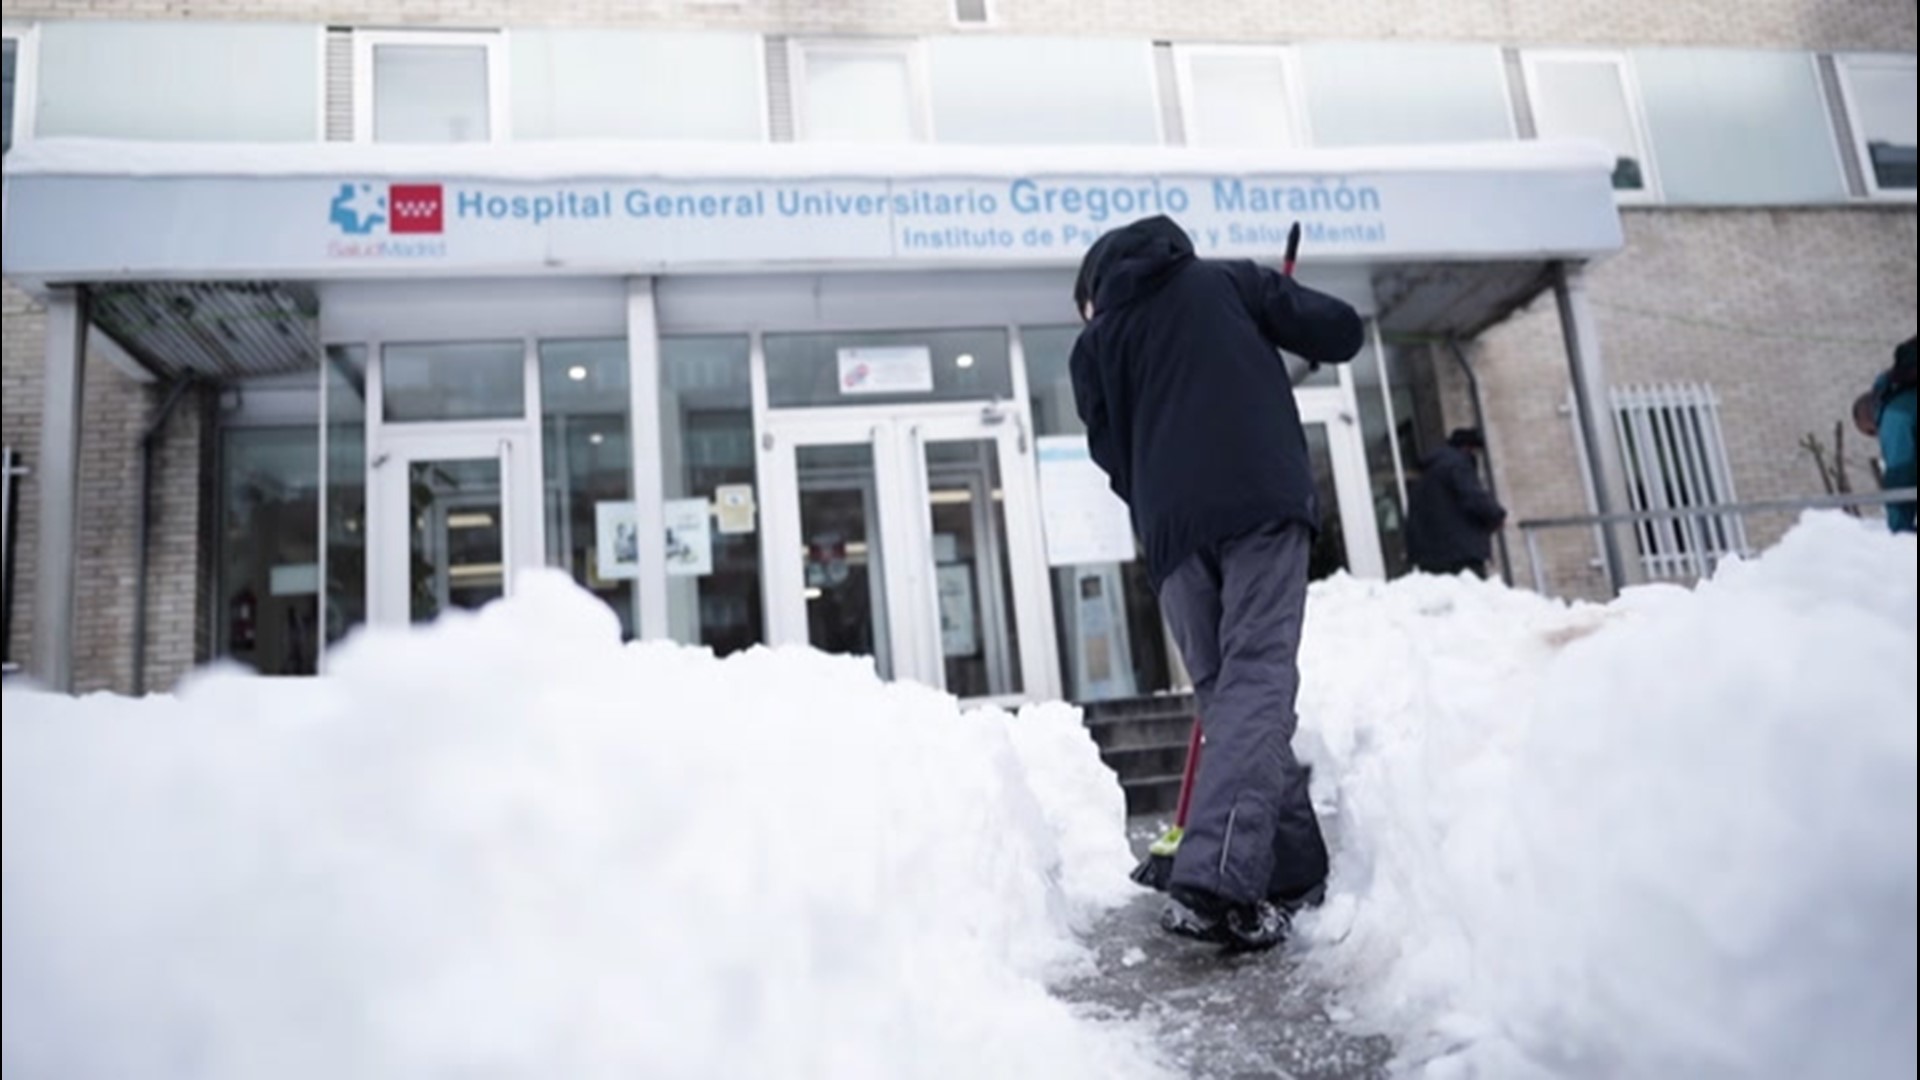 Residents of Madrid, Spain, cleared the entrances to hospitals on Jan. 10, after Storm Filomena dropped several inches of snow on the city.